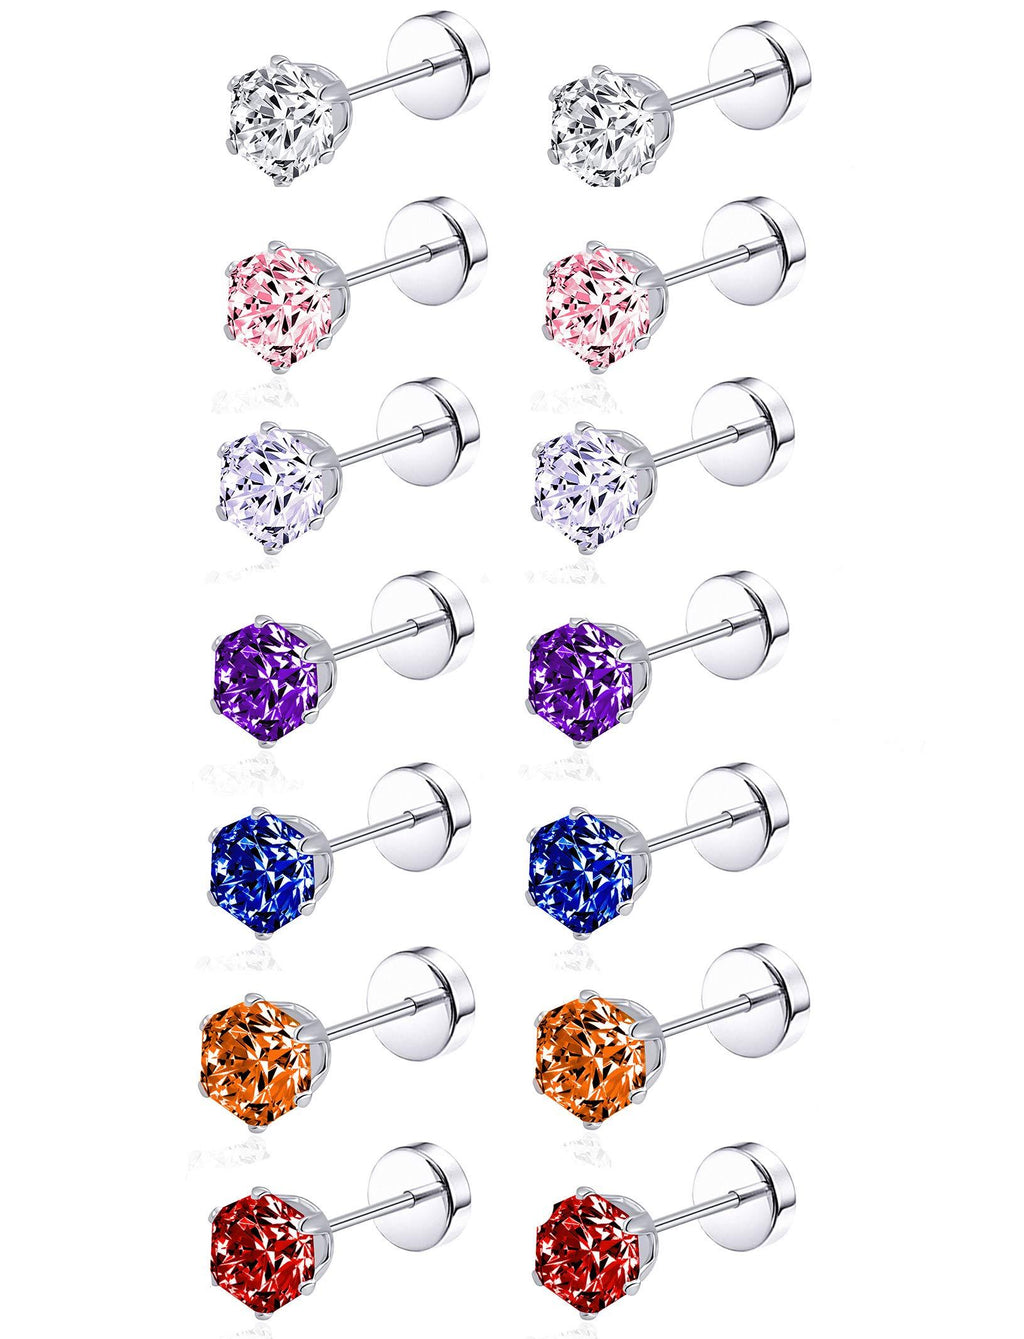 [Australia] - Tornito 7-14 Pairs Stainless Steel CZ Stud Earrings for Women Girls Multicolor Cubic Zirconia Cartilage Helix Earrings Set Screwback 4MM A:7 Pairs 